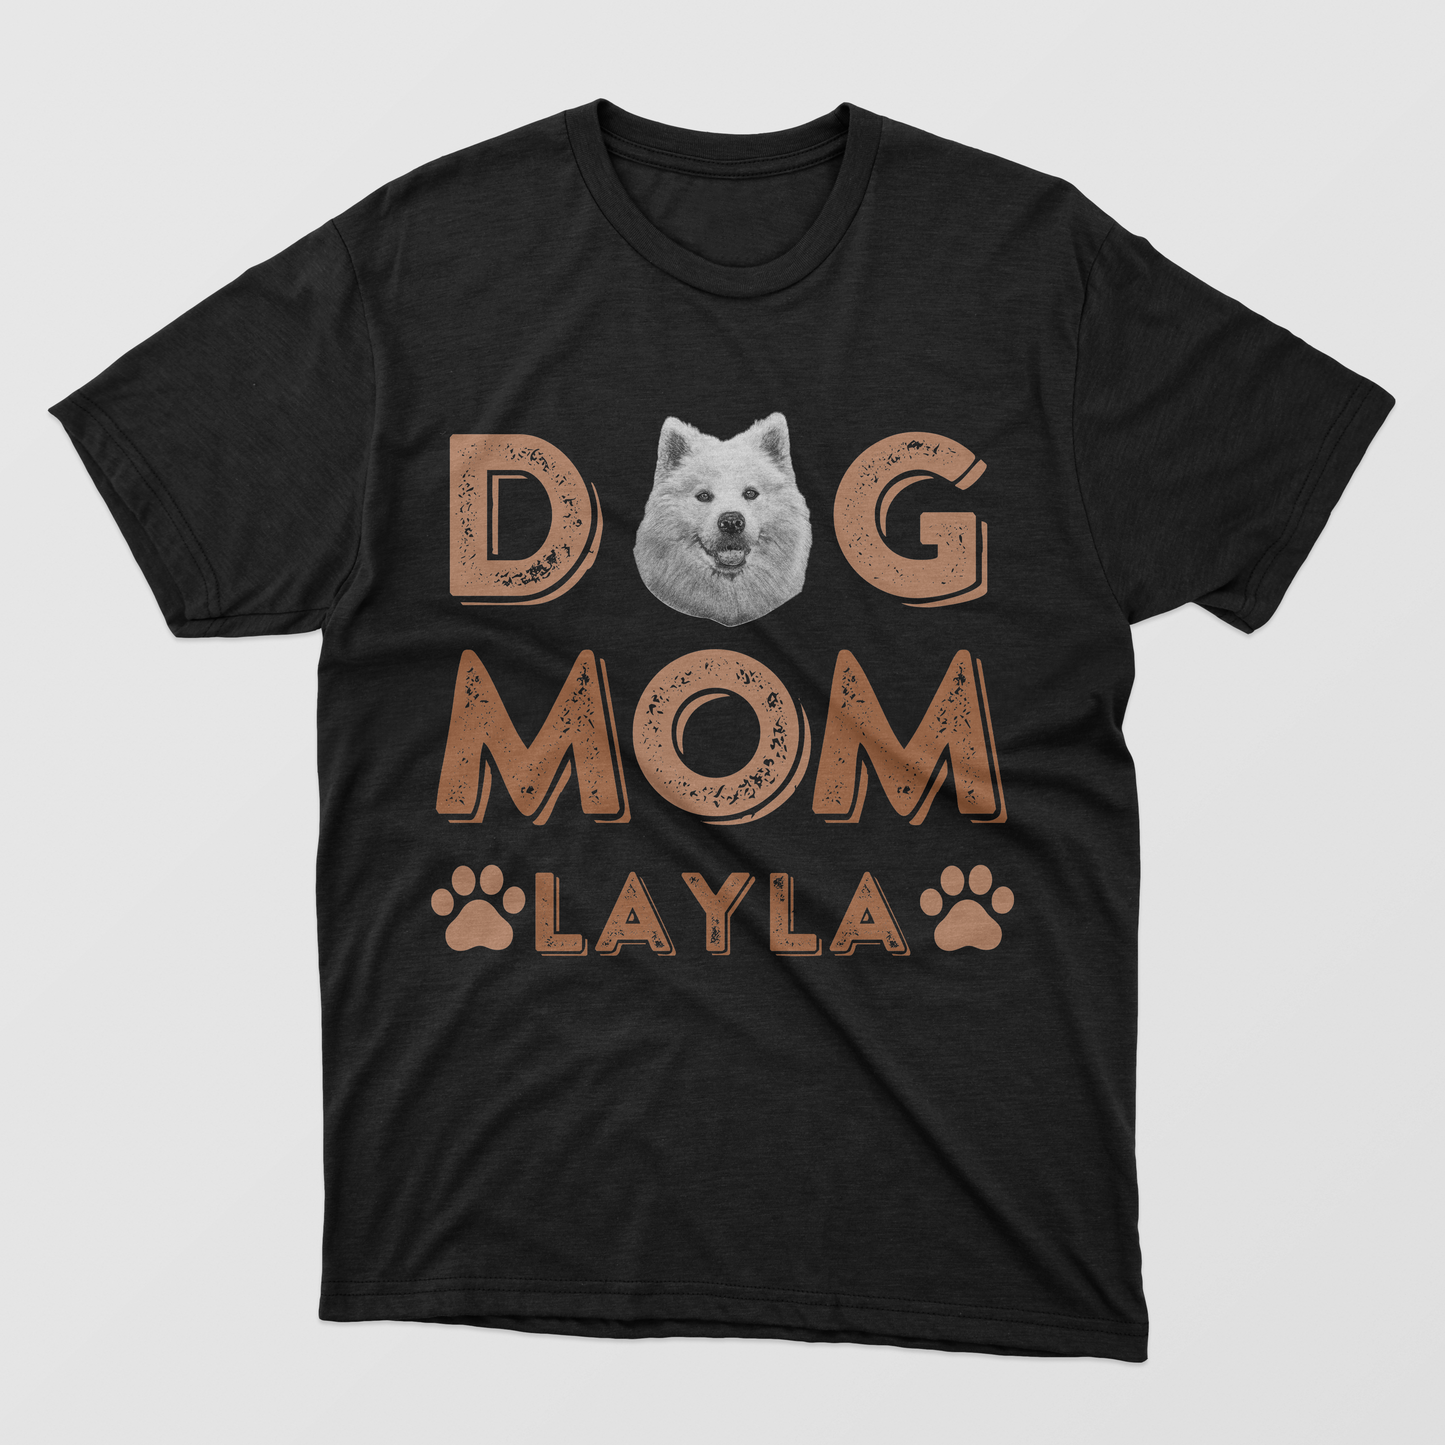 Dog Mom Shirt, Personalized Dog Shirt, Personalized Shirt For Mother's Day, Pet Mom Gift Idea, Customized Dog's Name Shirt, Gift Idea Shirt For Dog Lovers, Lovely Shirt For Who Loves Dog, Cute Retro Dog Mom Shirt, Gift For Dog Holic